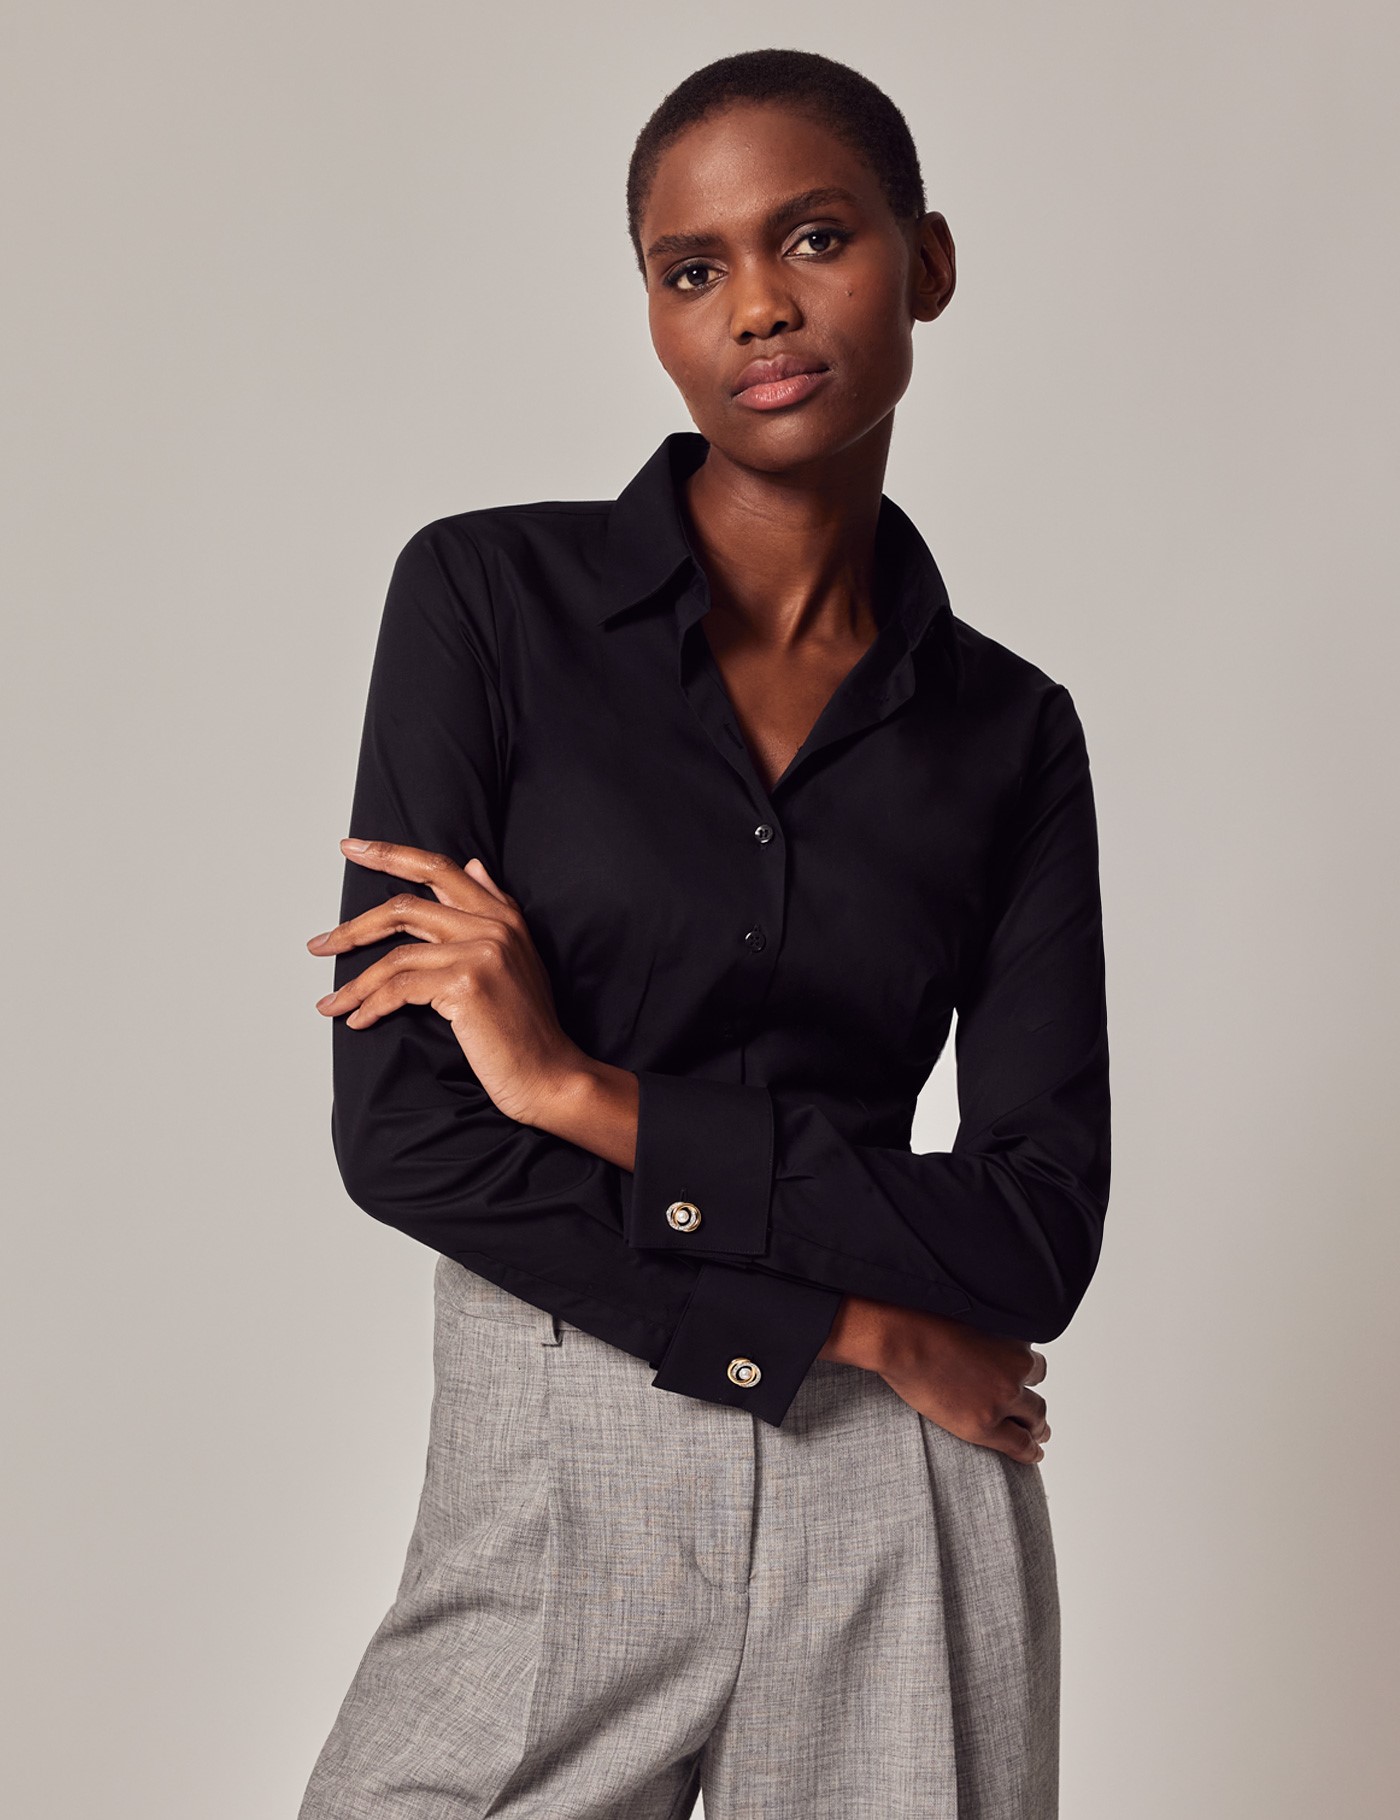 meesteres Beschrijving Master diploma Women's Black Fitted Cotton Stretch Shirt - Double Cuffs | Hawes & Curtis